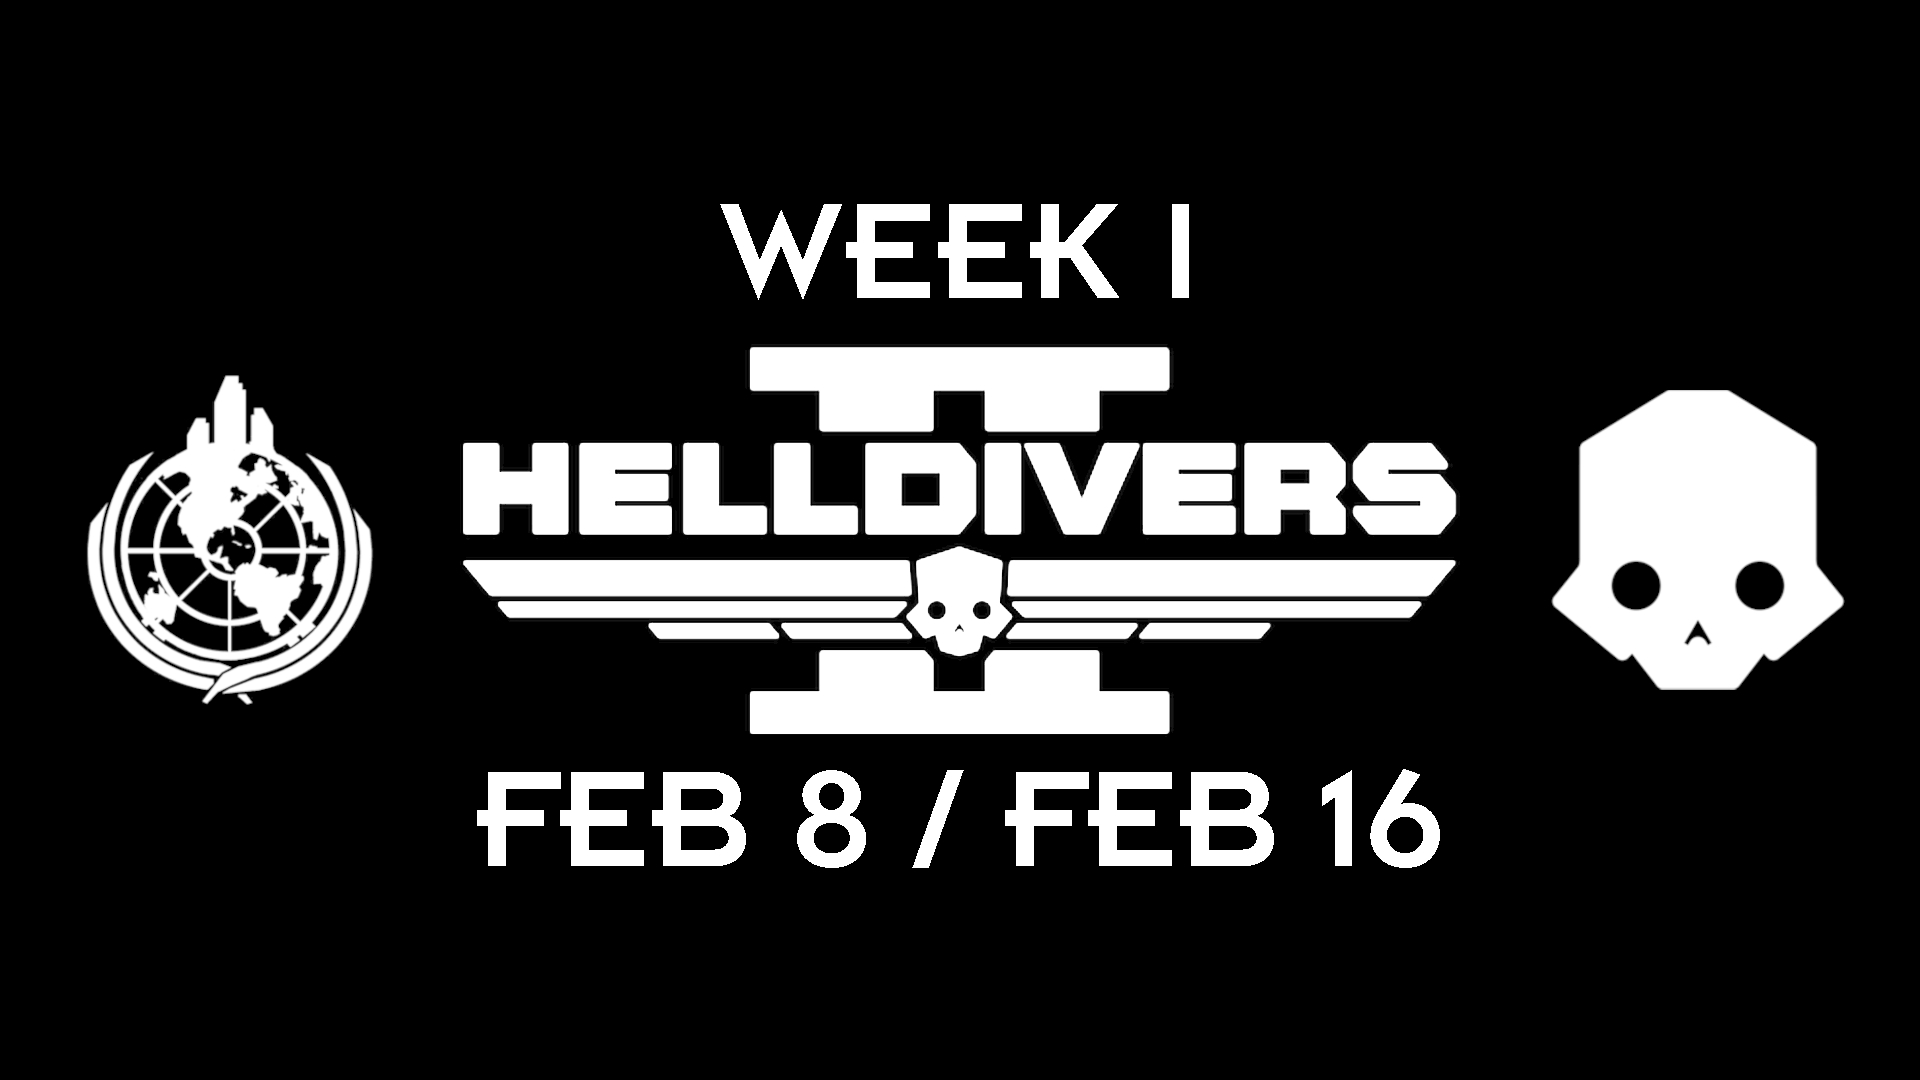 helldivers 2 week i featured image